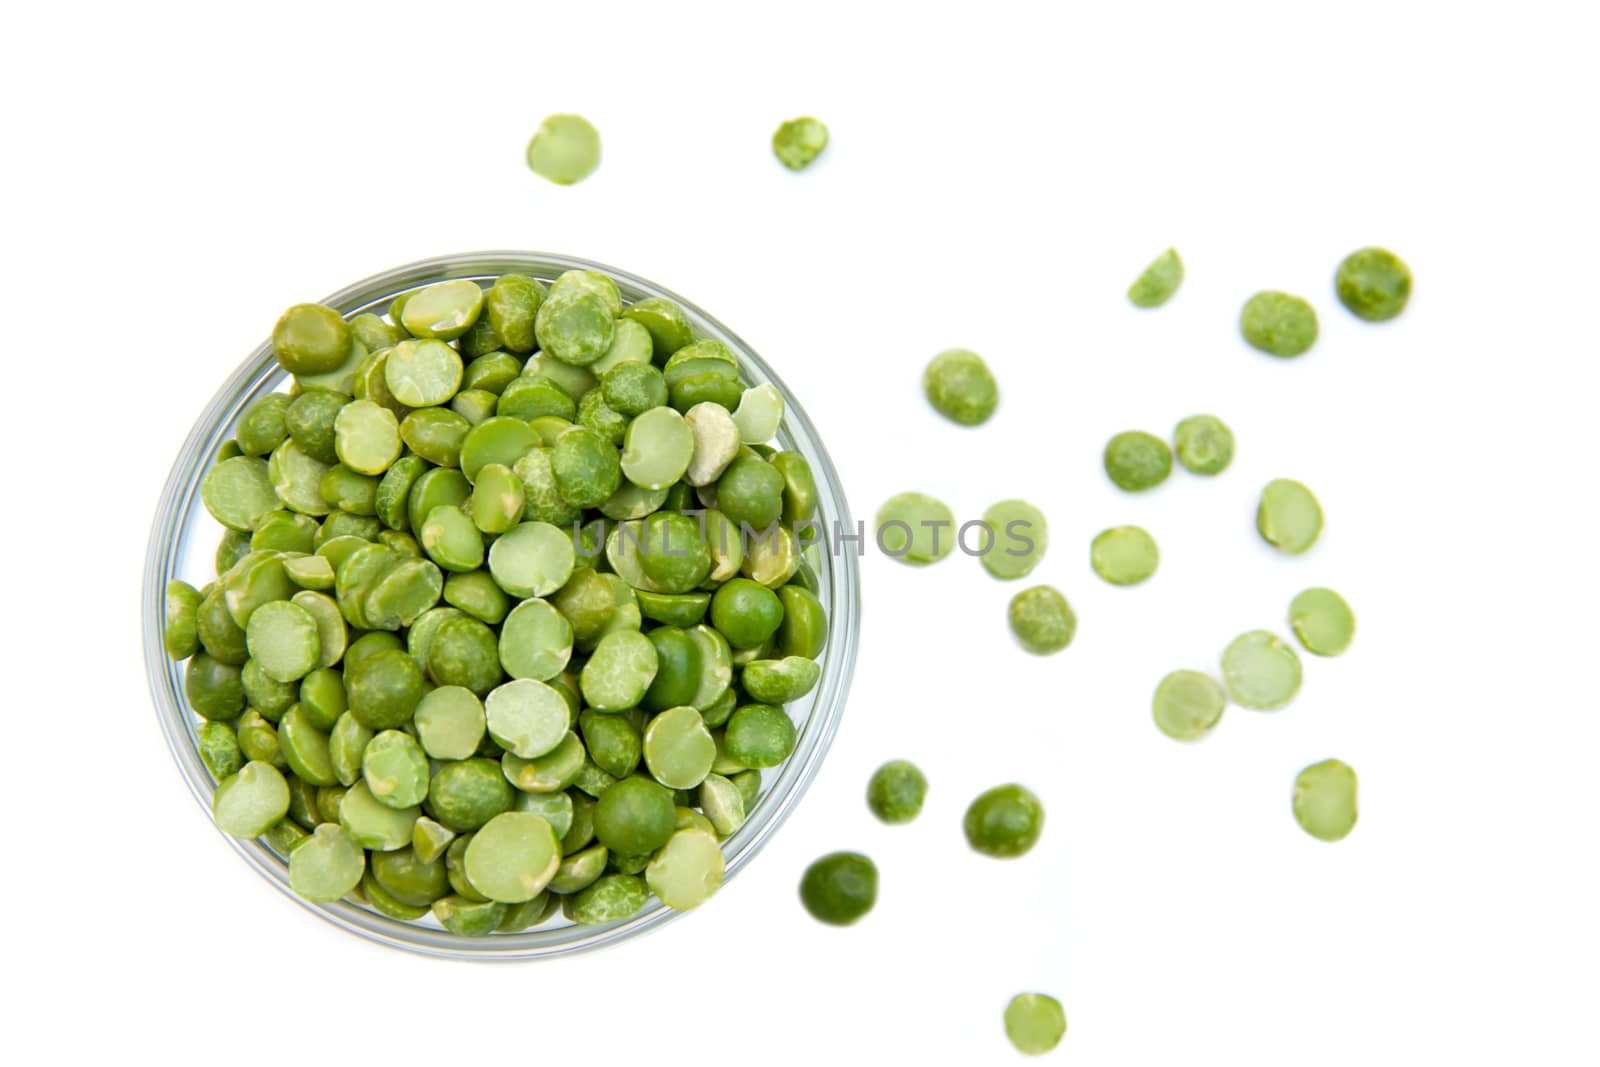 Dried peas in bowl on white background seen from above